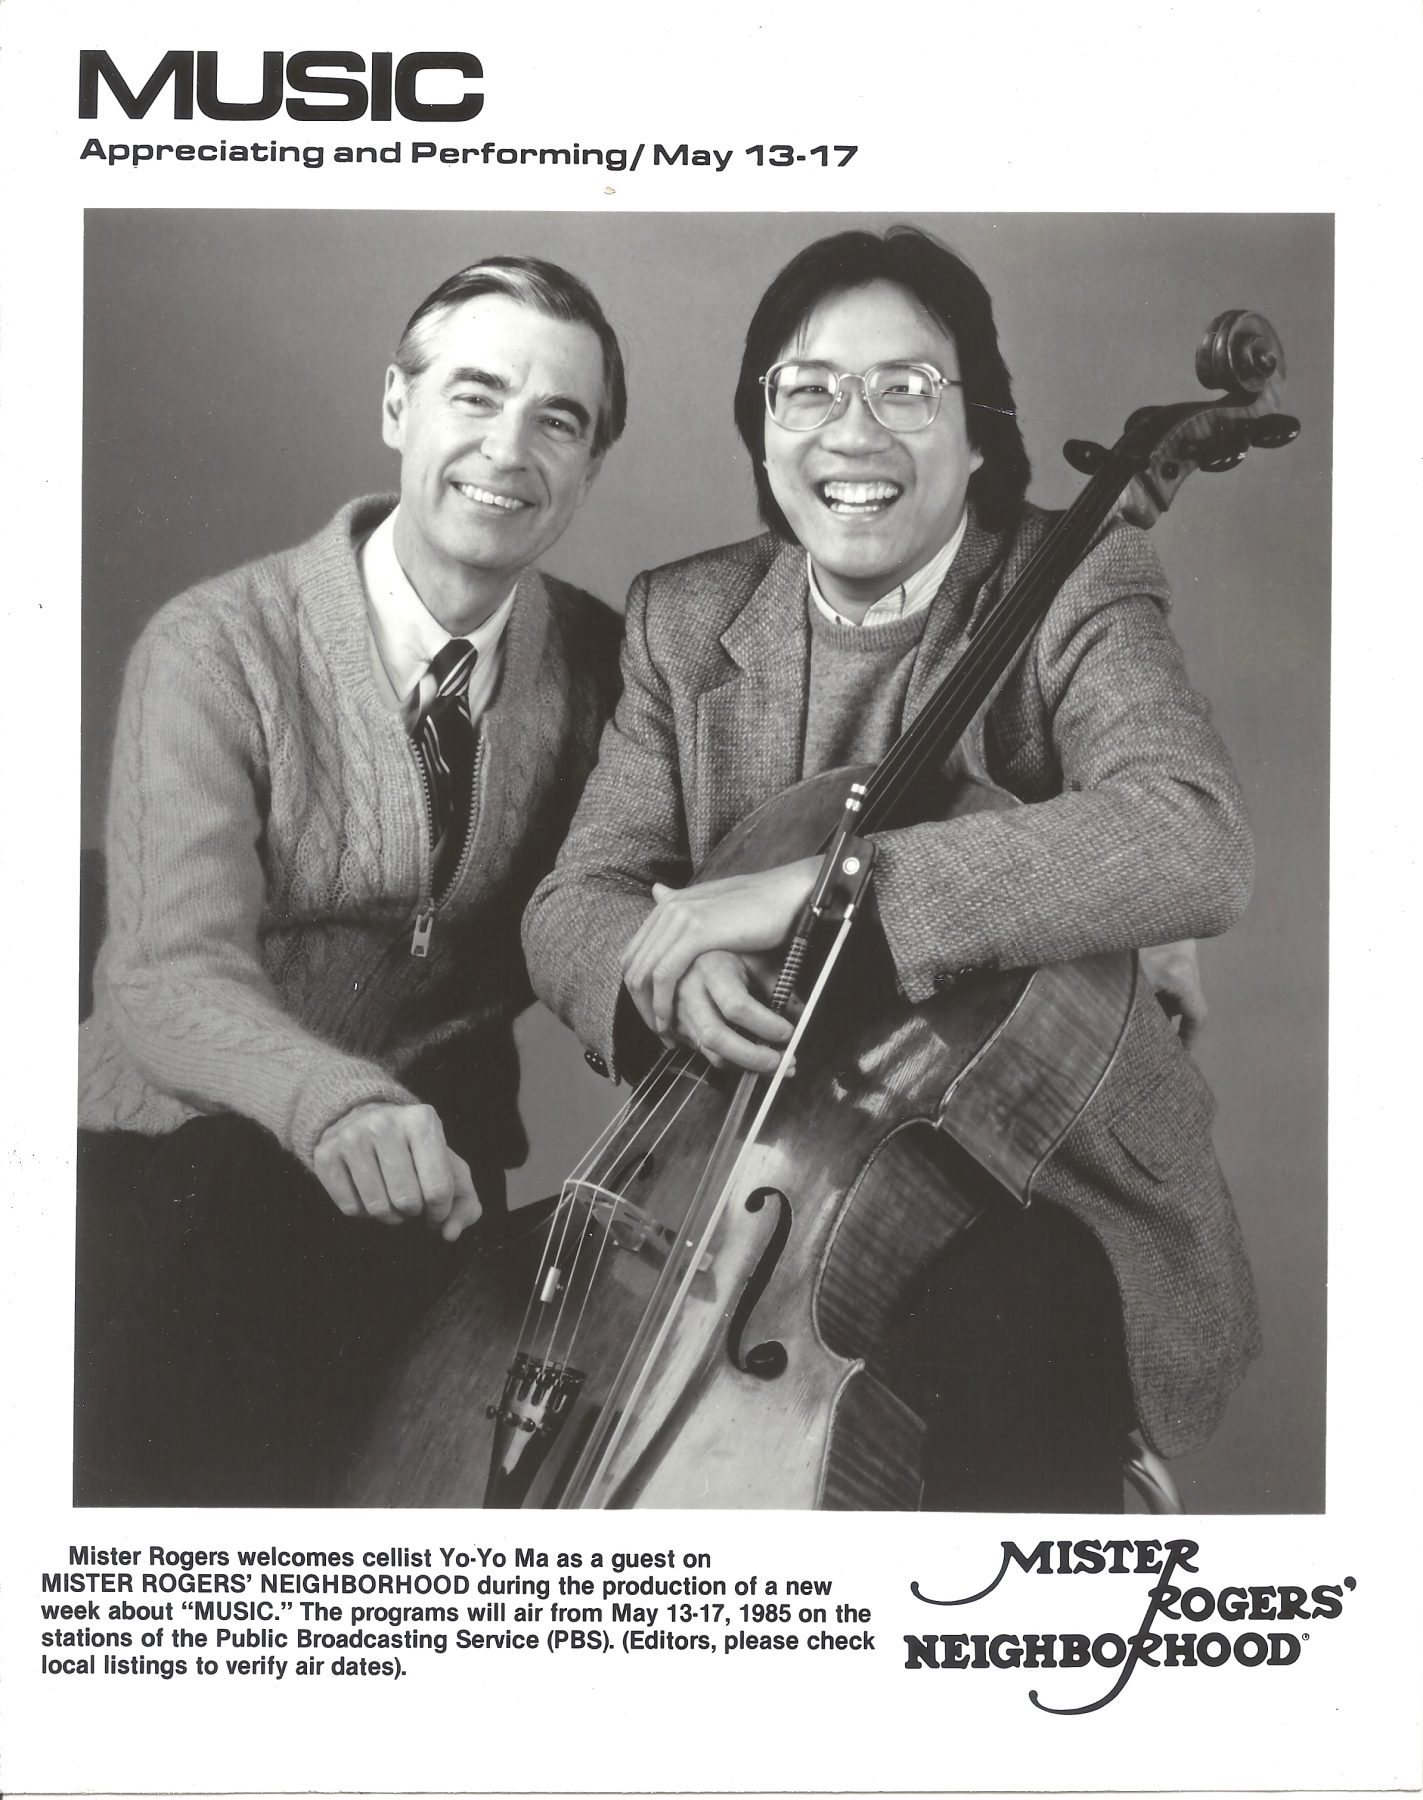 28 May 2019 Posted.
Image of Mister Rogers and Yo-Yo Ma, Courtesy of Alex Jay, Museum of Chinese in America (MOCA) Collection.
罗杰斯先生和马友友的合影，Alex Jay捐赠，美国华人博物馆（MOCCA）馆藏